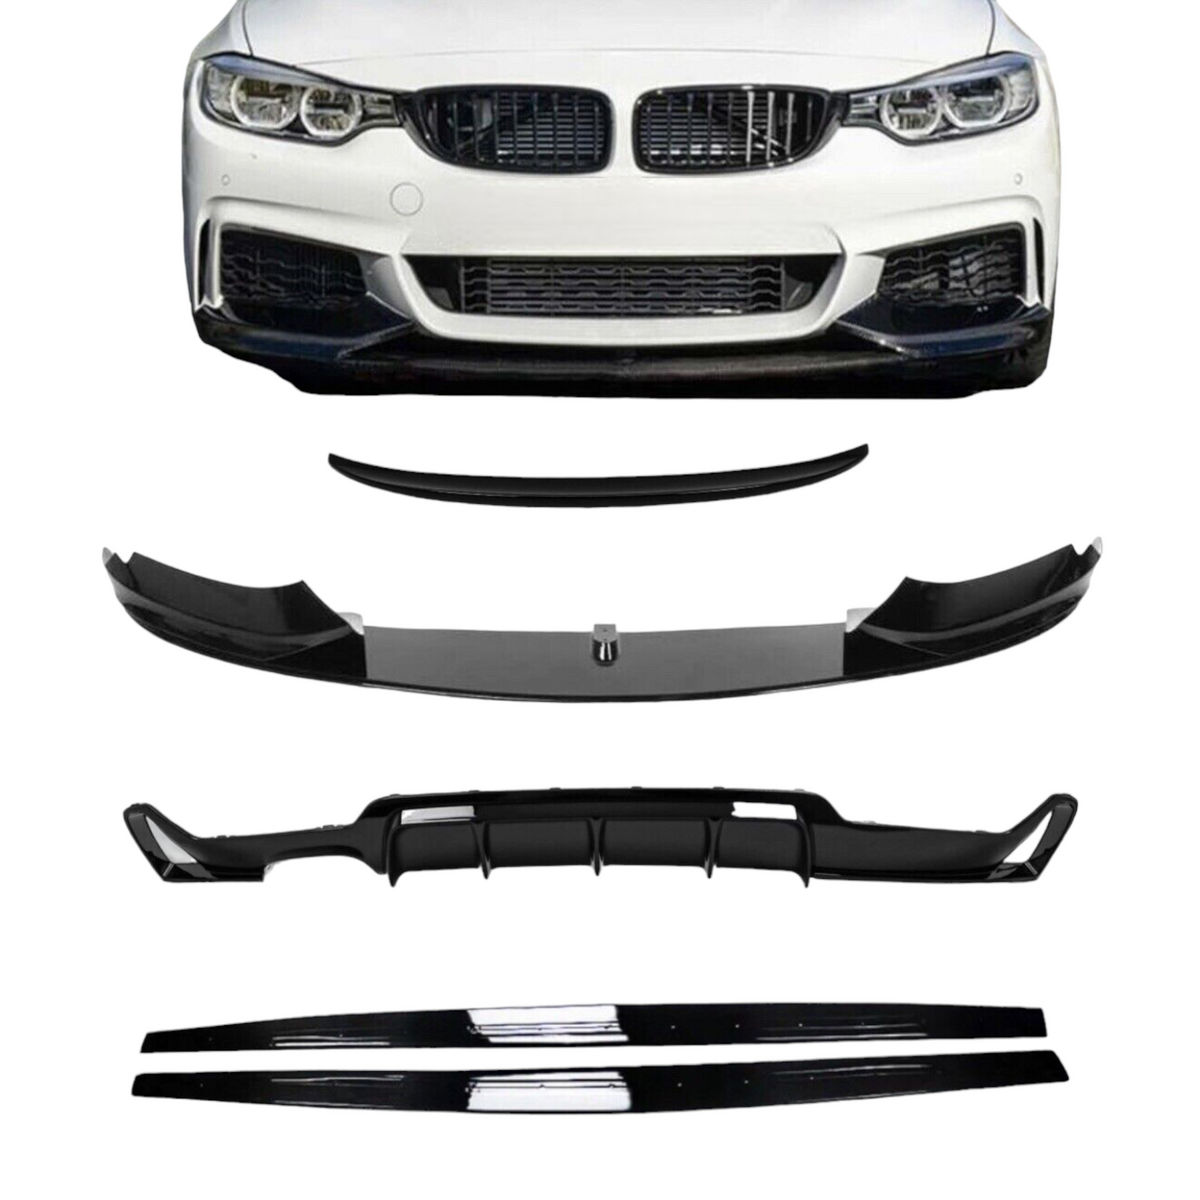 Full Body Kit - Fits BMW F32 4 Series Coupe - Gloss Black